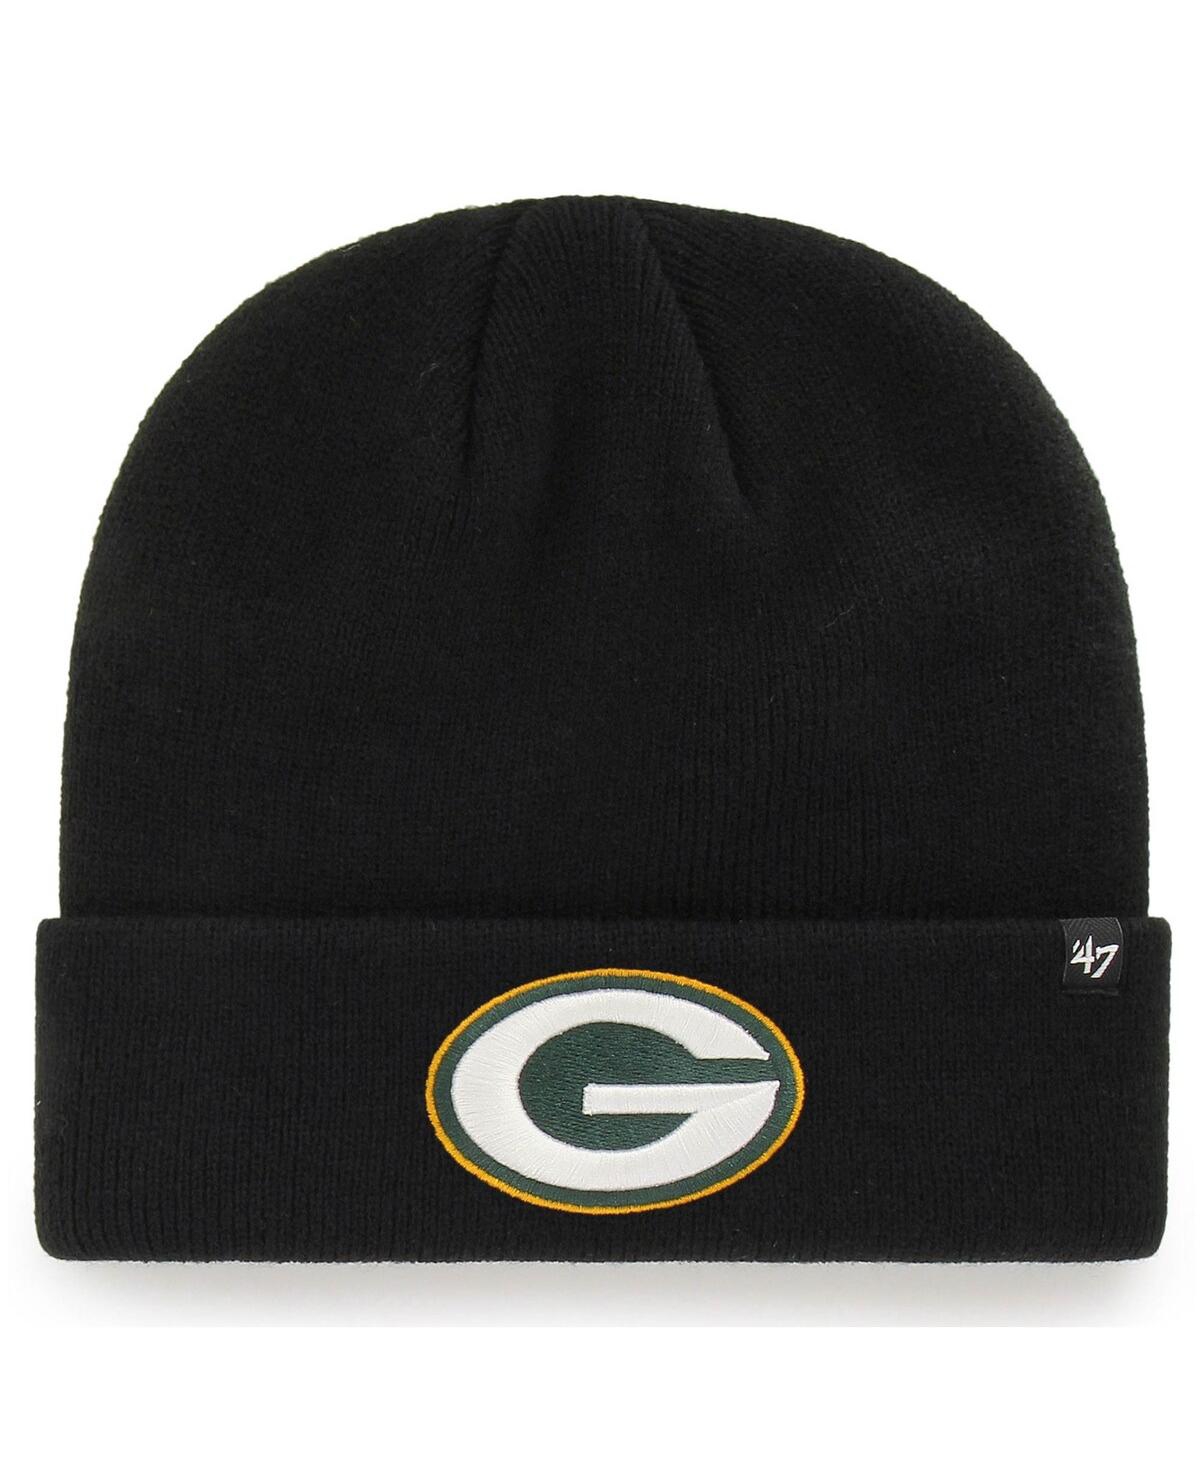 47 Brand Men's '47 Black Green Bay Packers Secondary Basic Cuffed Knit Hat